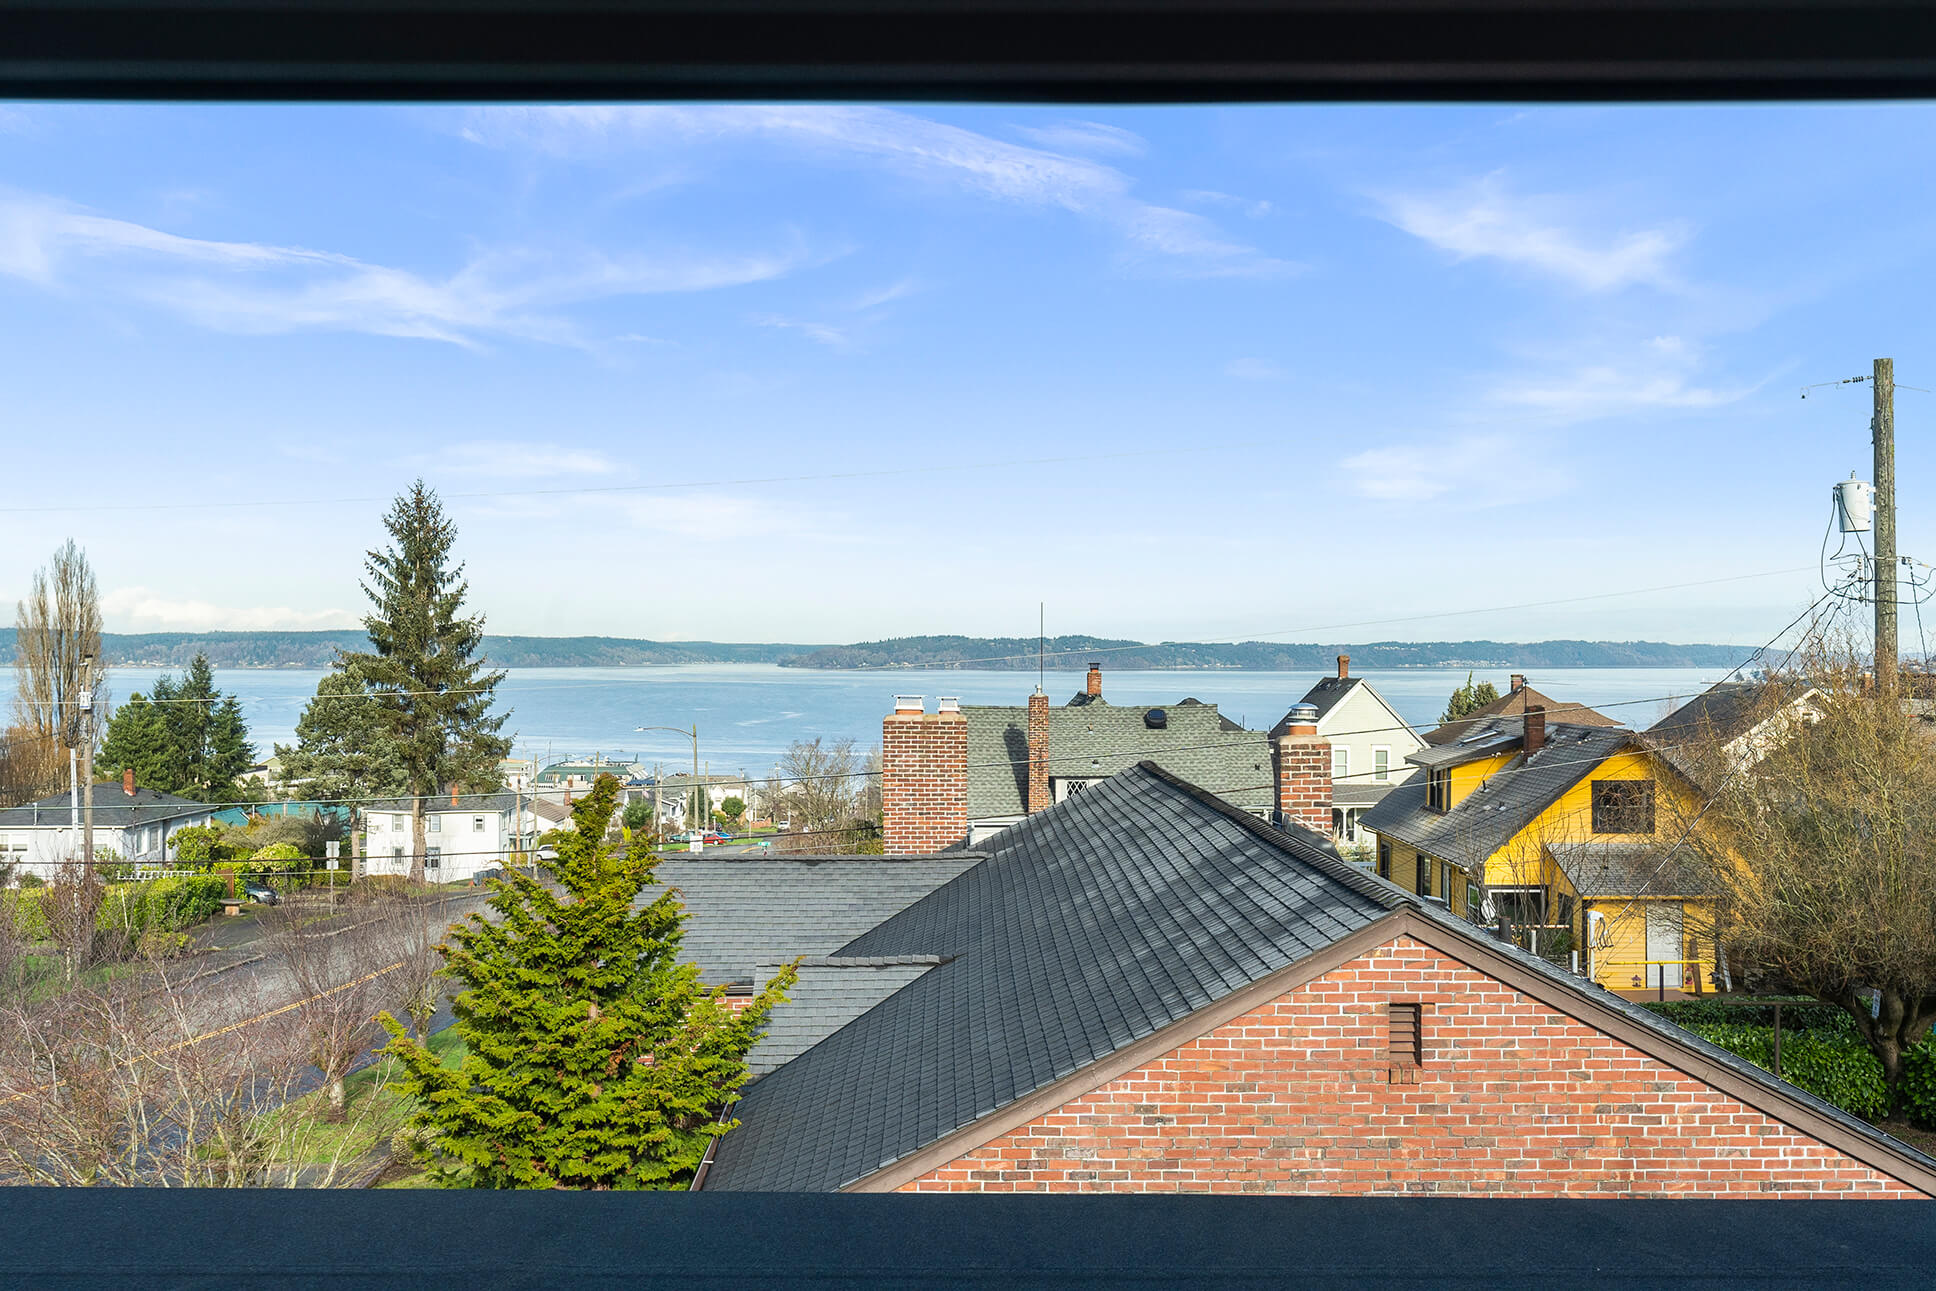 Sweeping views of Commencement Bay and Vashon Island